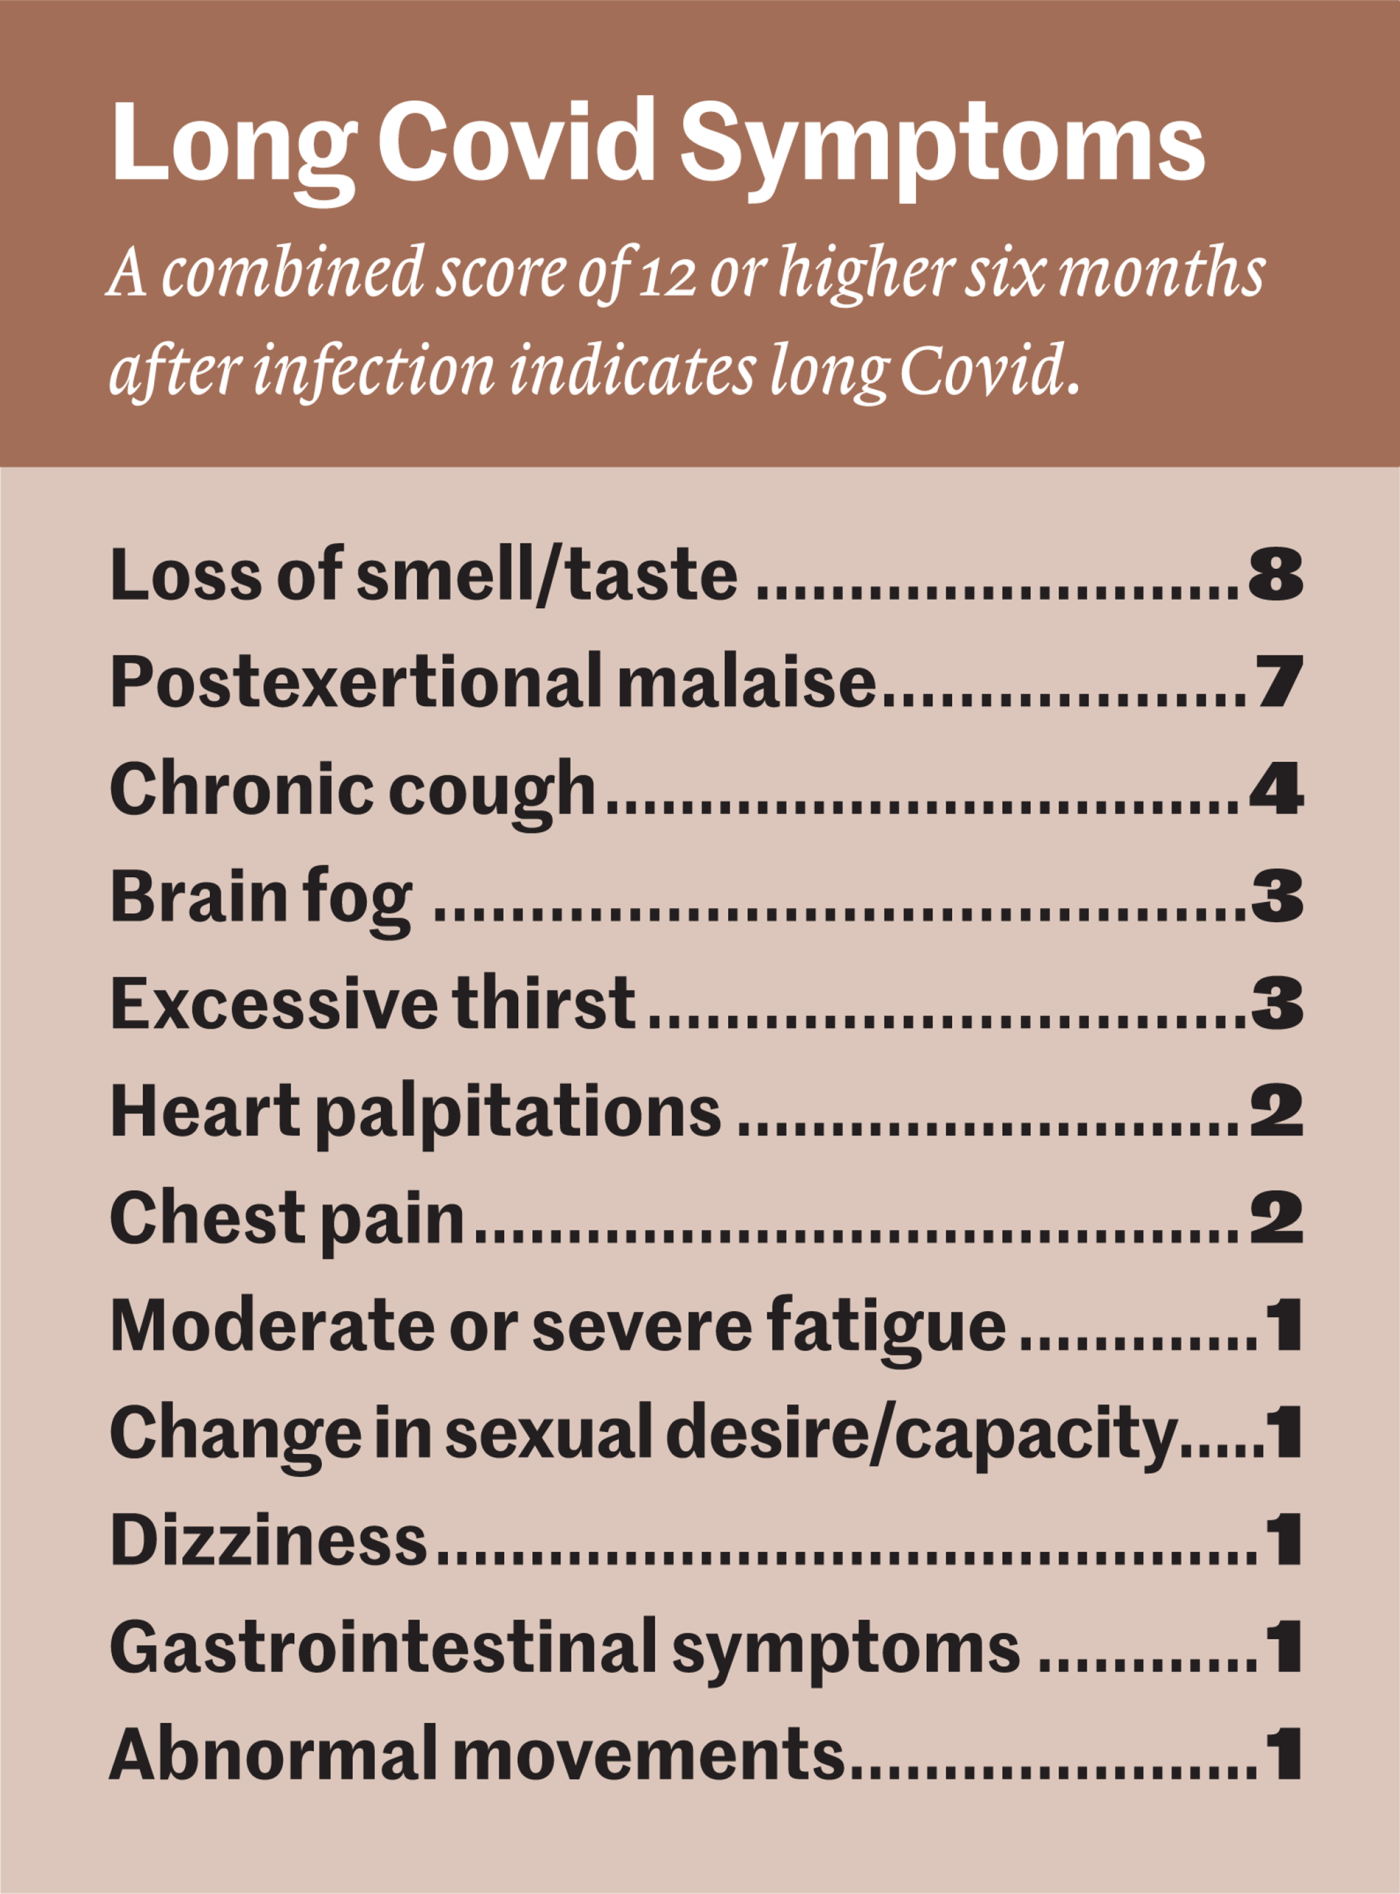 A list of Long Covid Symptoms that include: Loss of smell/taste, Postexertional malaise, Chronic cough, Brain fog, Excessive thirst, Heart palpitations, Chest pain, MOderage or sever fatigue, Change in sexual desire/capacity, Dizziness, Gastrointestinal symptoms, and Abnormal movements.